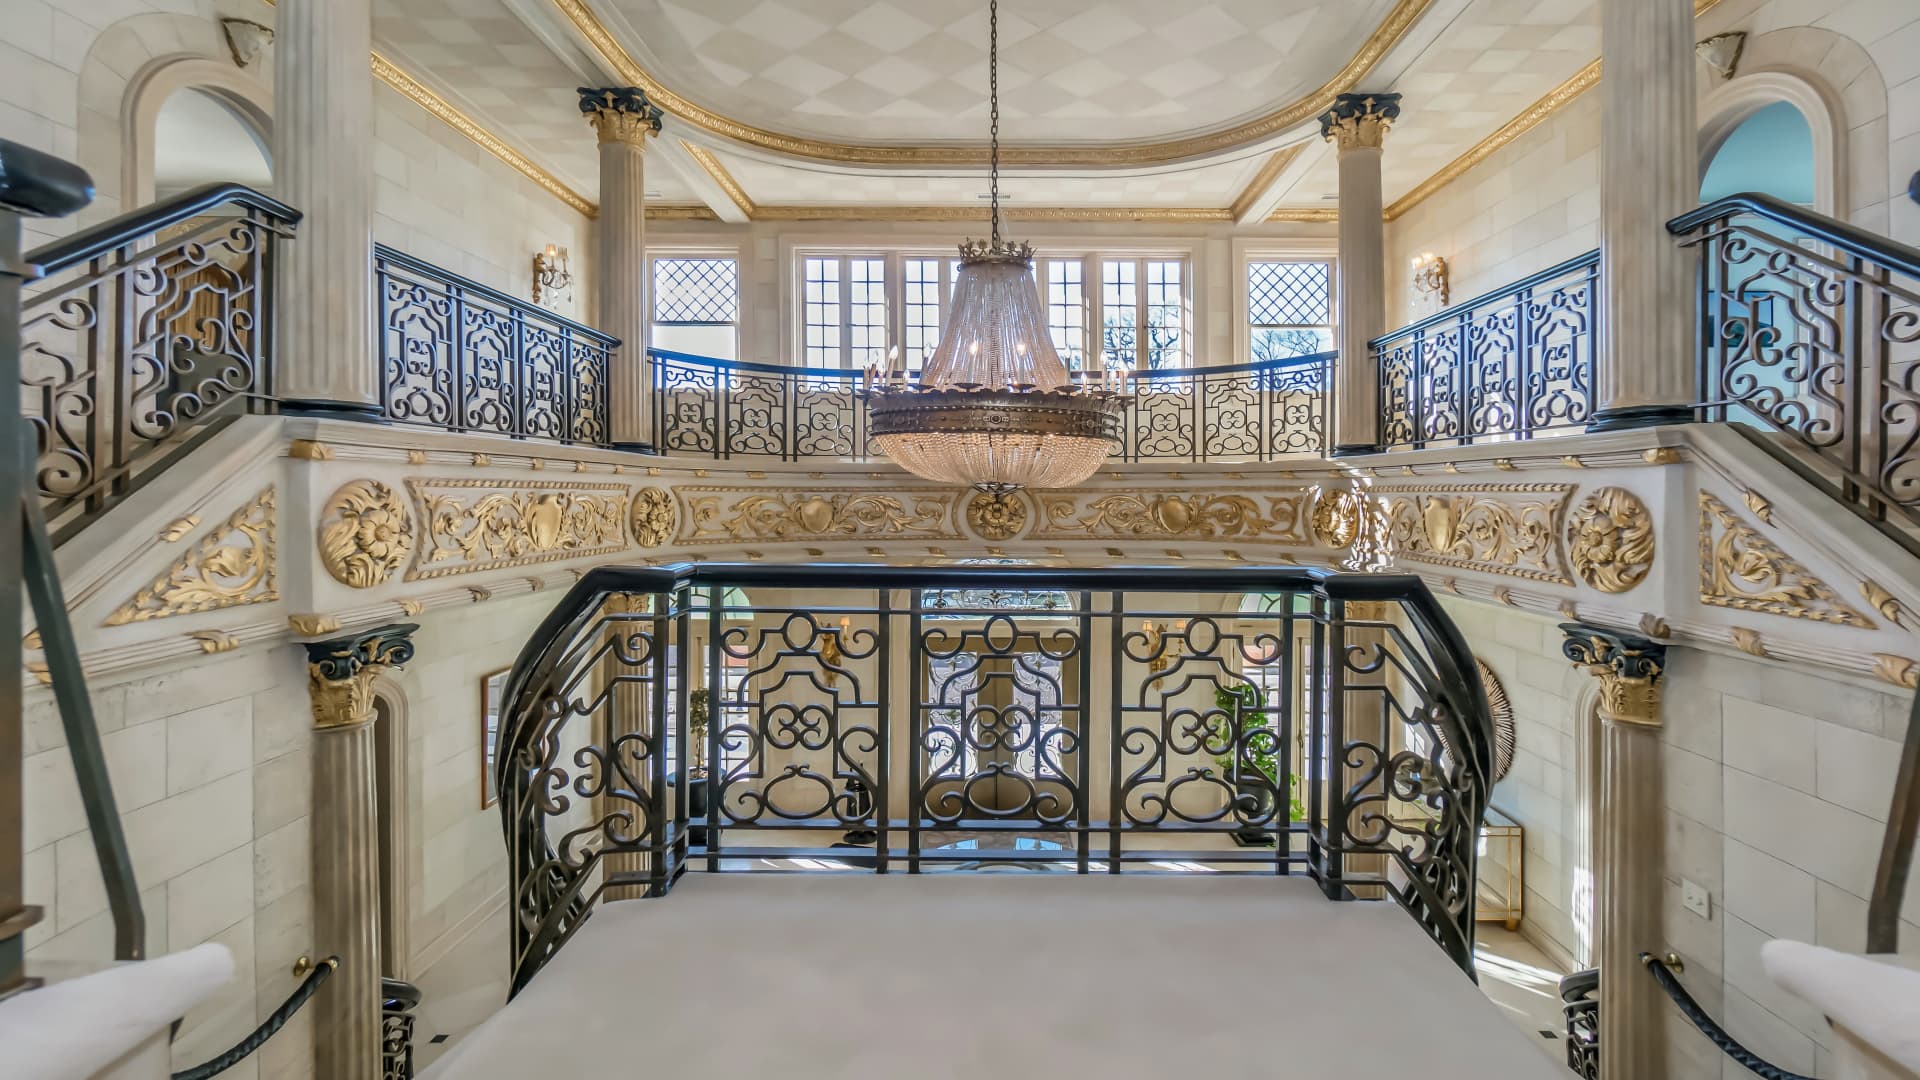 The grand entryway includes ornate trim and double height ceilings.